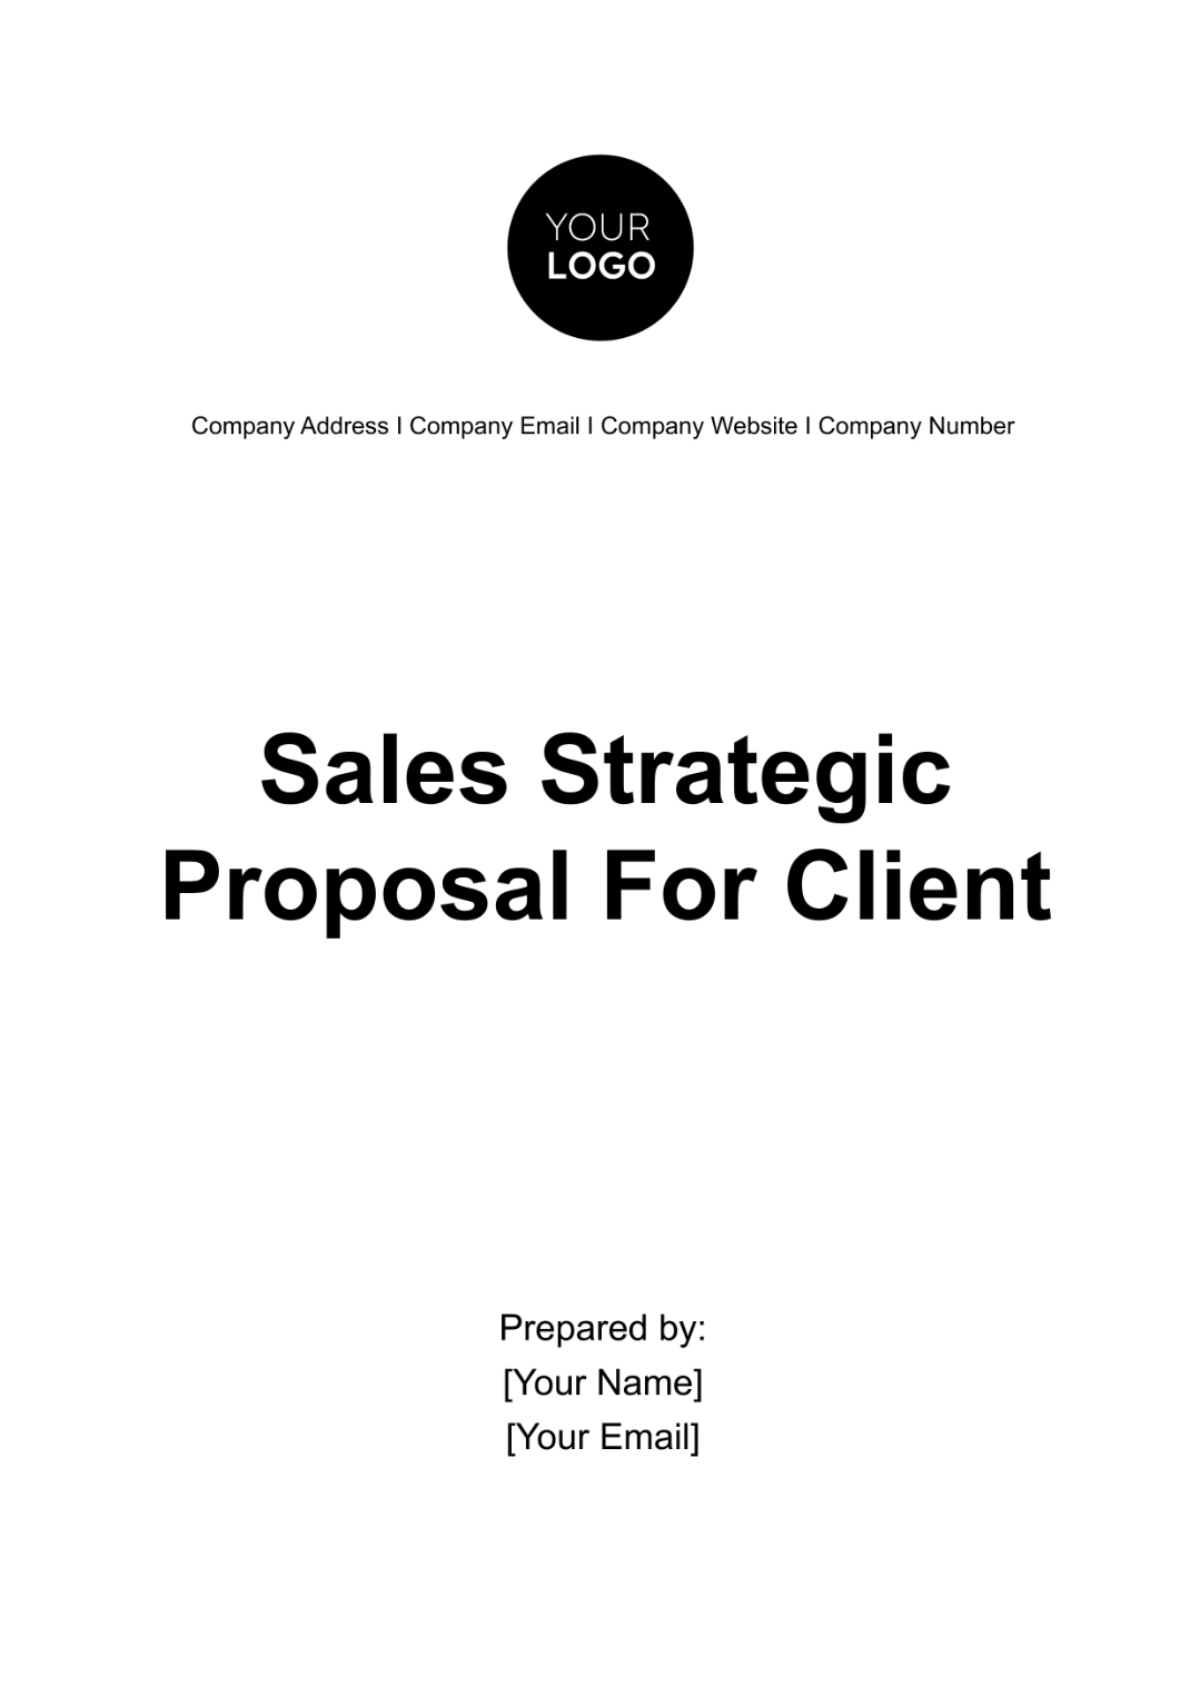 Sales Strategic Proposal for Client Onboarding Template